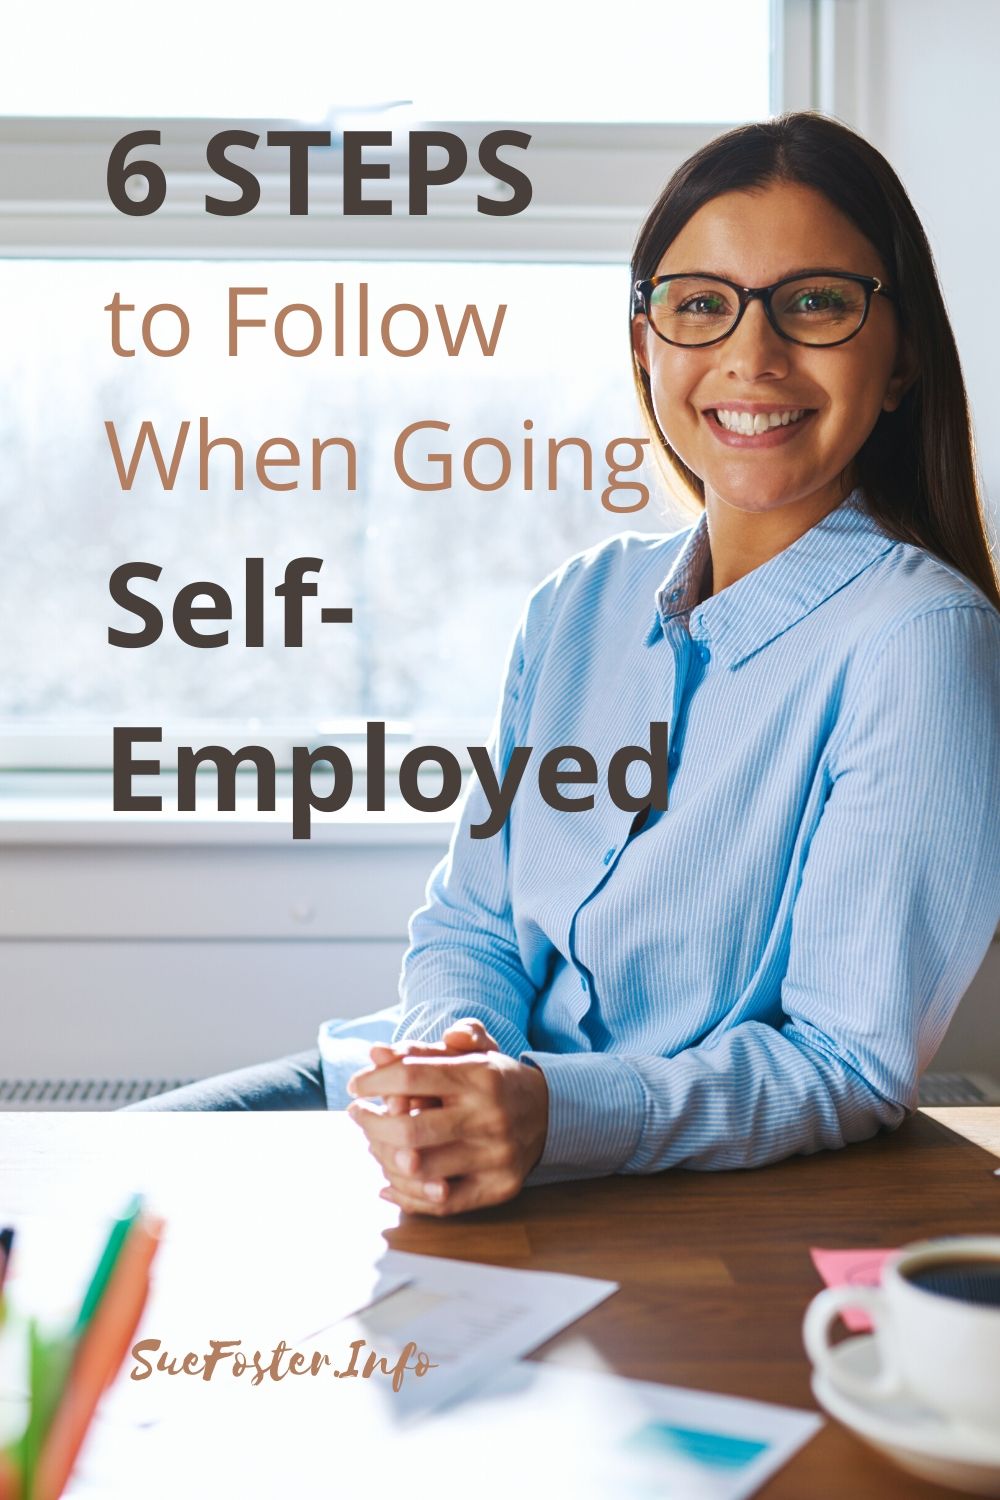 Here is a quick and easy guide to the key steps involved in going self-employed.